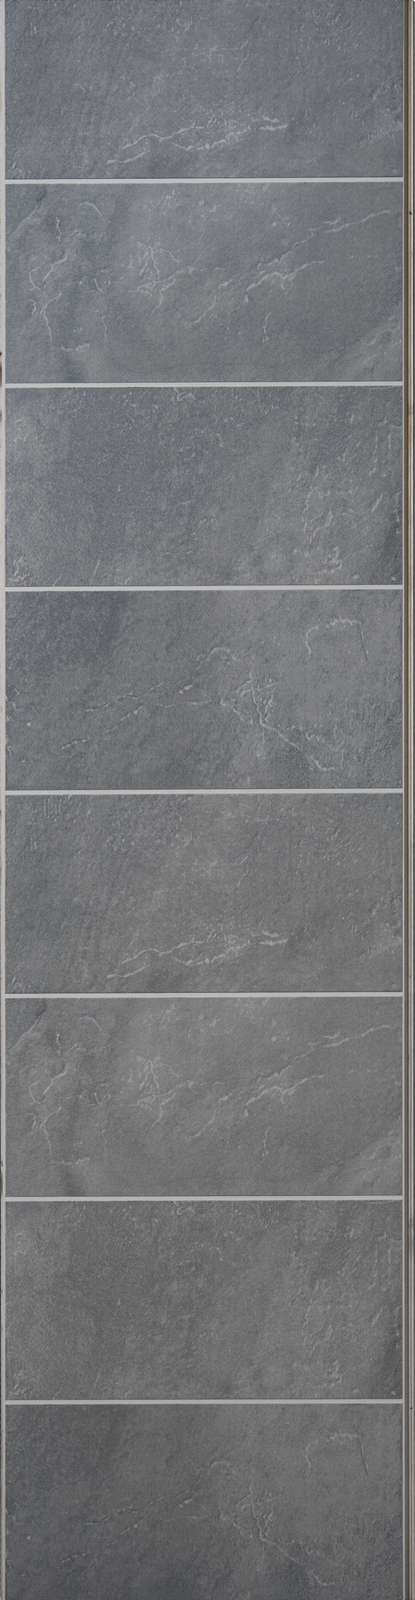 Black Slate 24 x 12 laminate shower wall panels - Innovate Building Solutions 